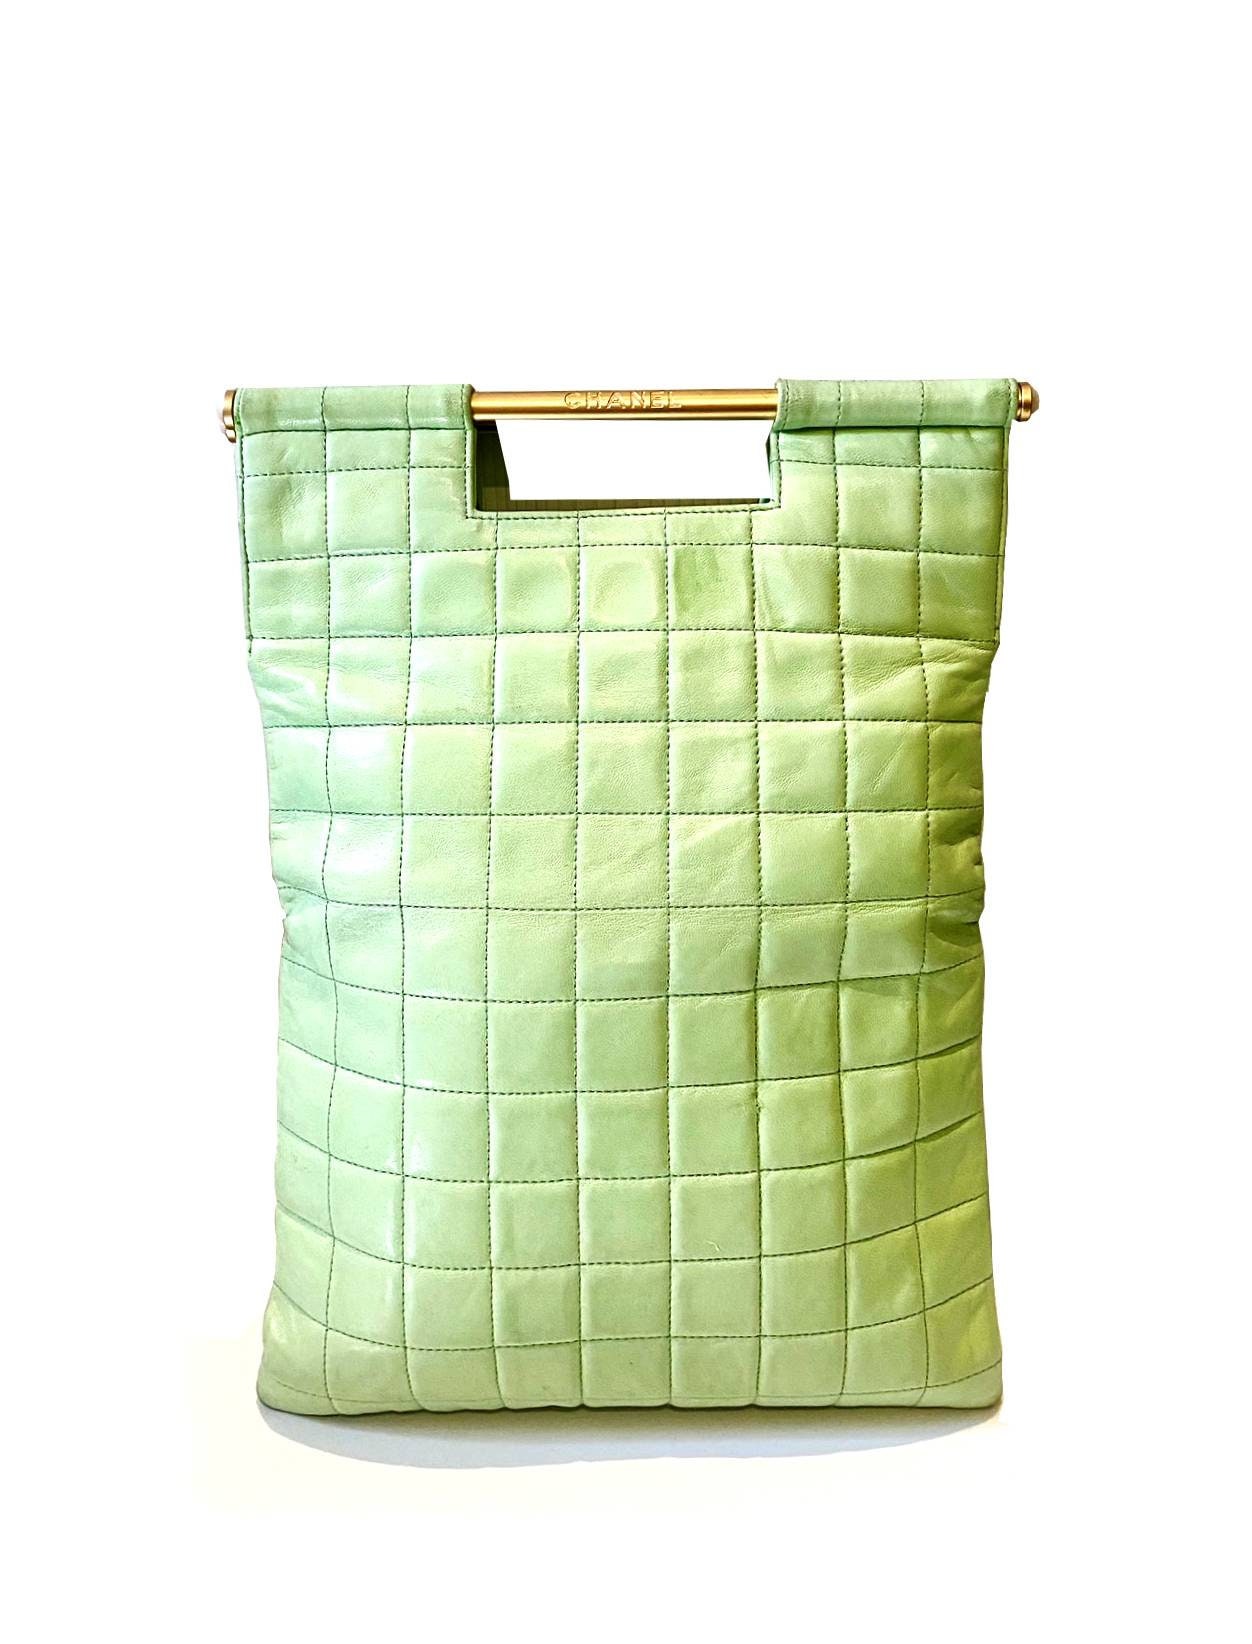 Chanel Quilted Mint Green Top Metal Handle Leather Tote Flap 